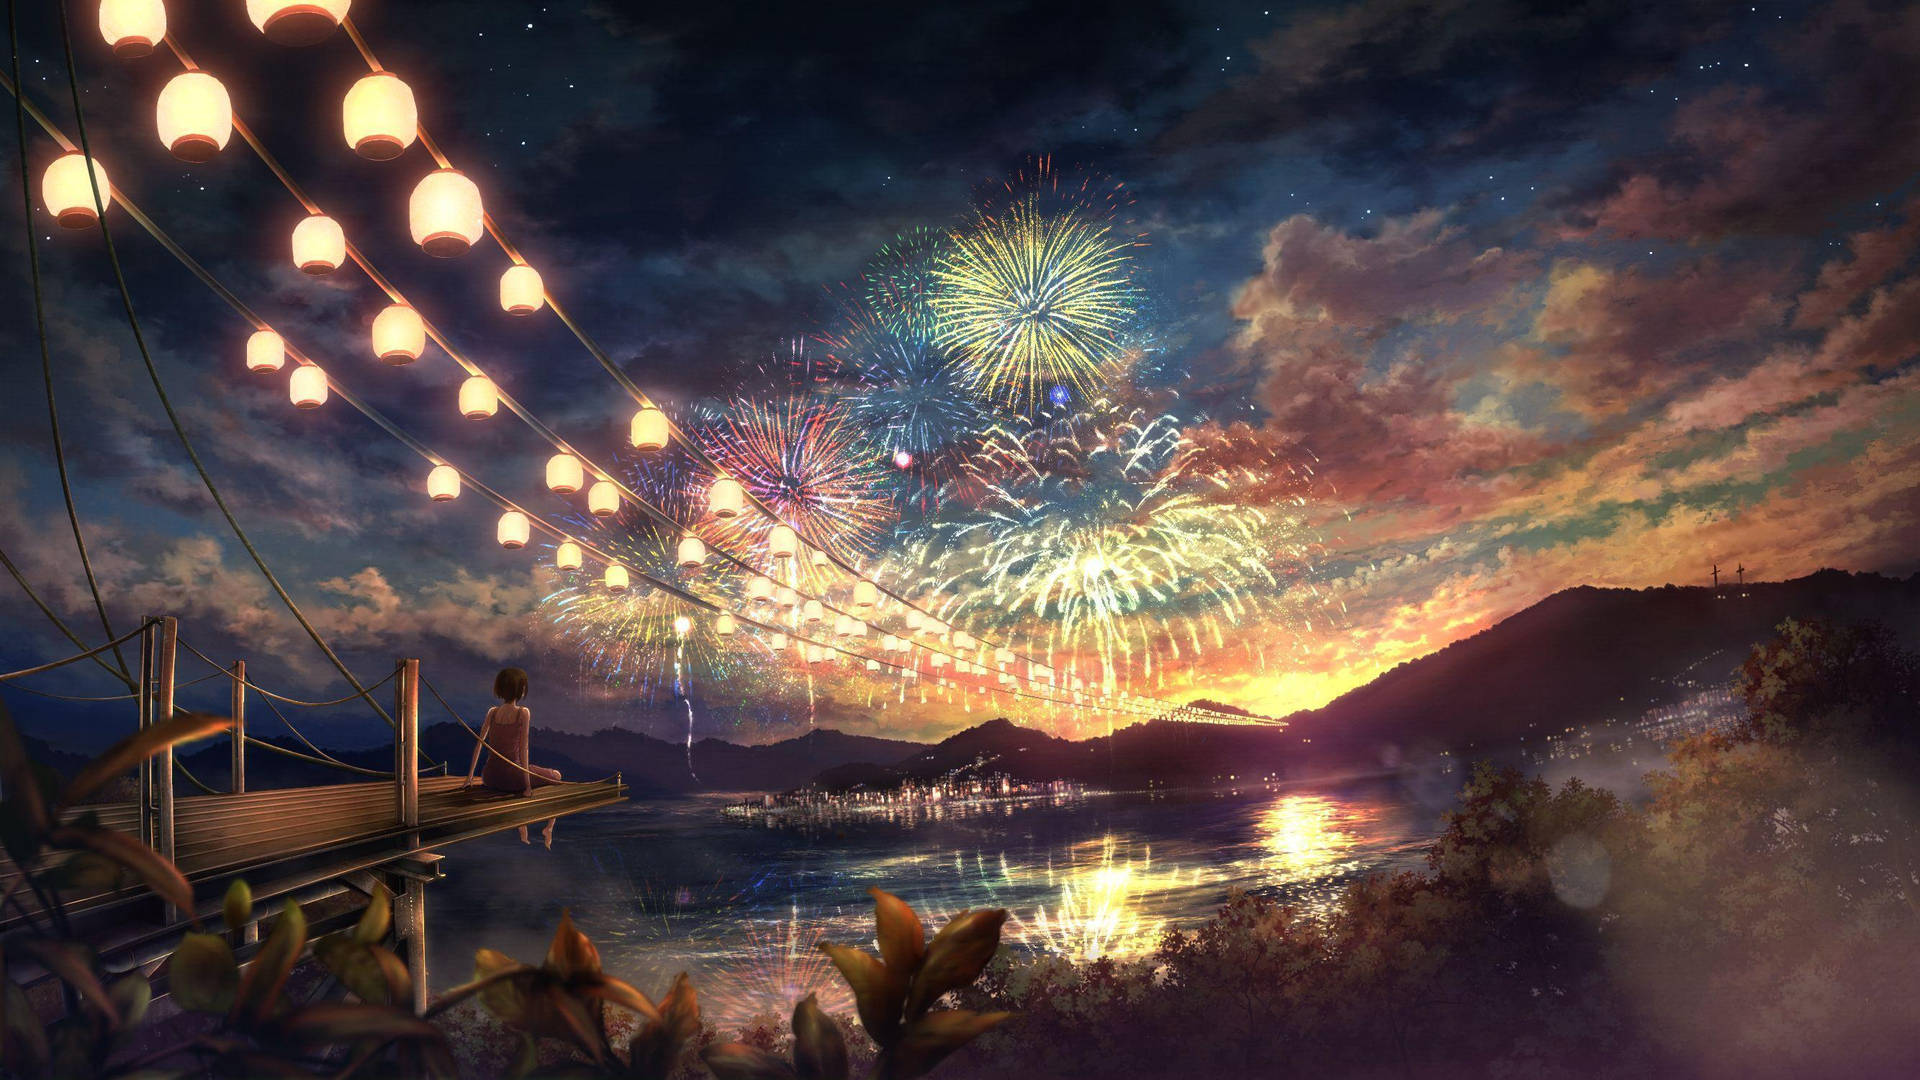 Download Romantic Anime Couples Fireworks Boat Wallpaper | Wallpapers.com